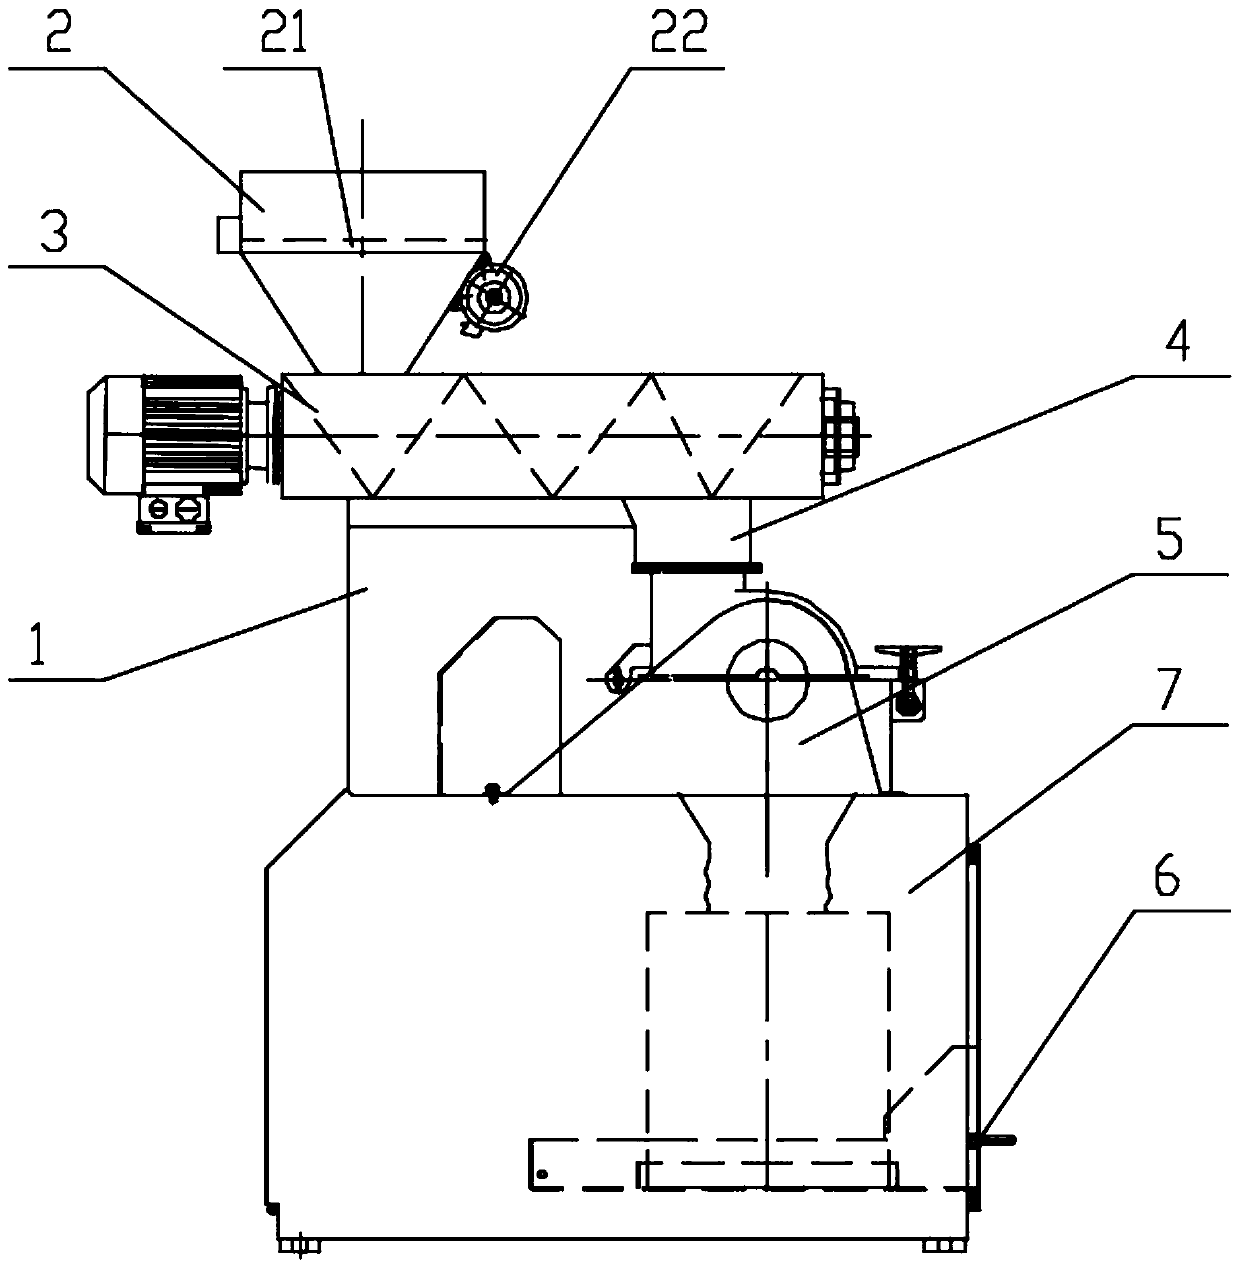 Sample preparation crusher capable of automatically feeding